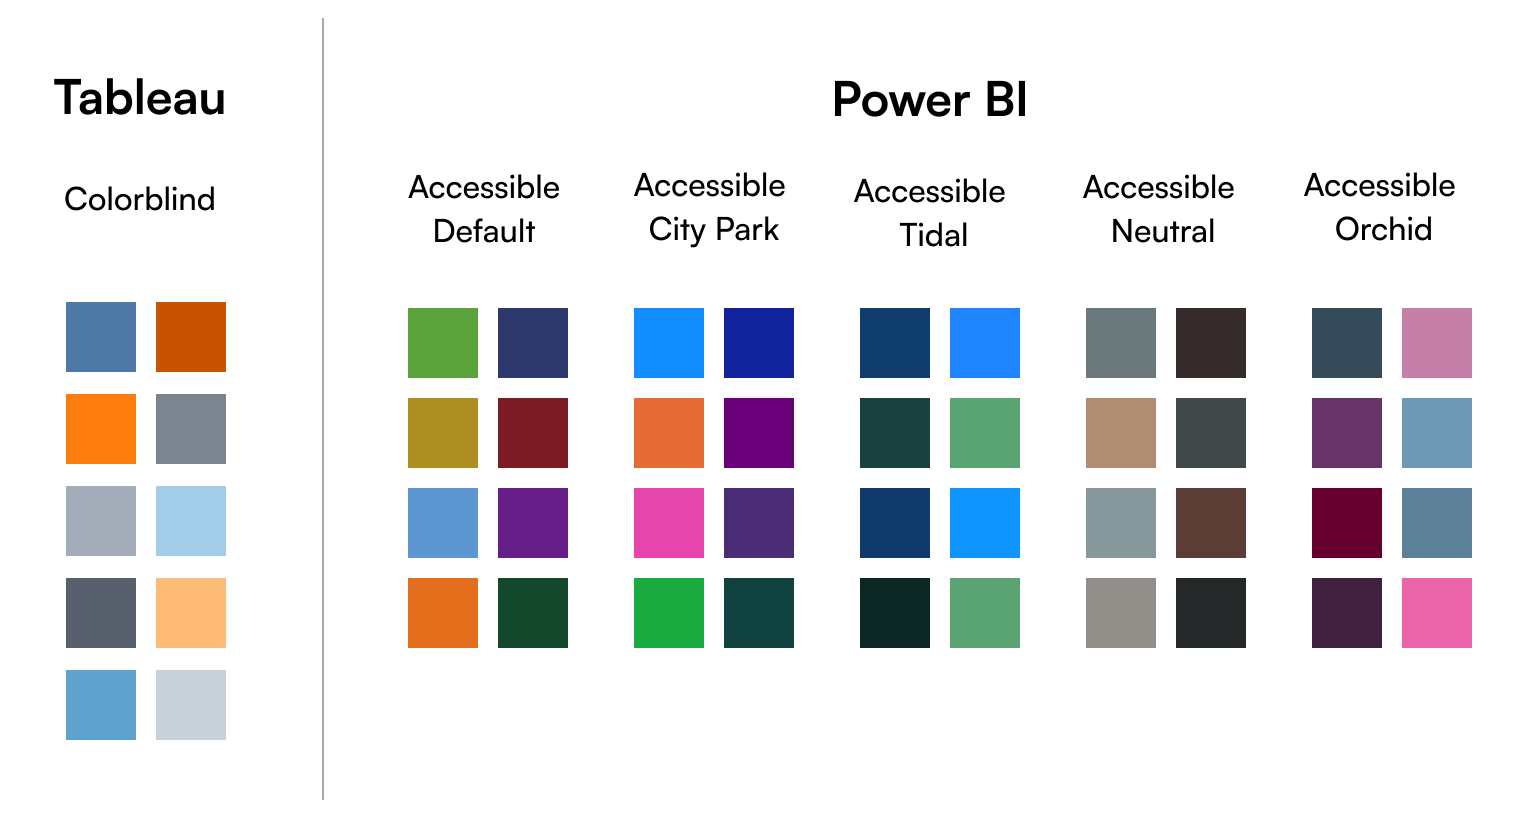 Illustration of color-blind friendly color palettes, from left to right: Taleau’s only palette named Colorblind, Power Bi’s Accessible Default, Accessible City Park, Accessible Tidal, Accessible Neutral, Accessible Orchid